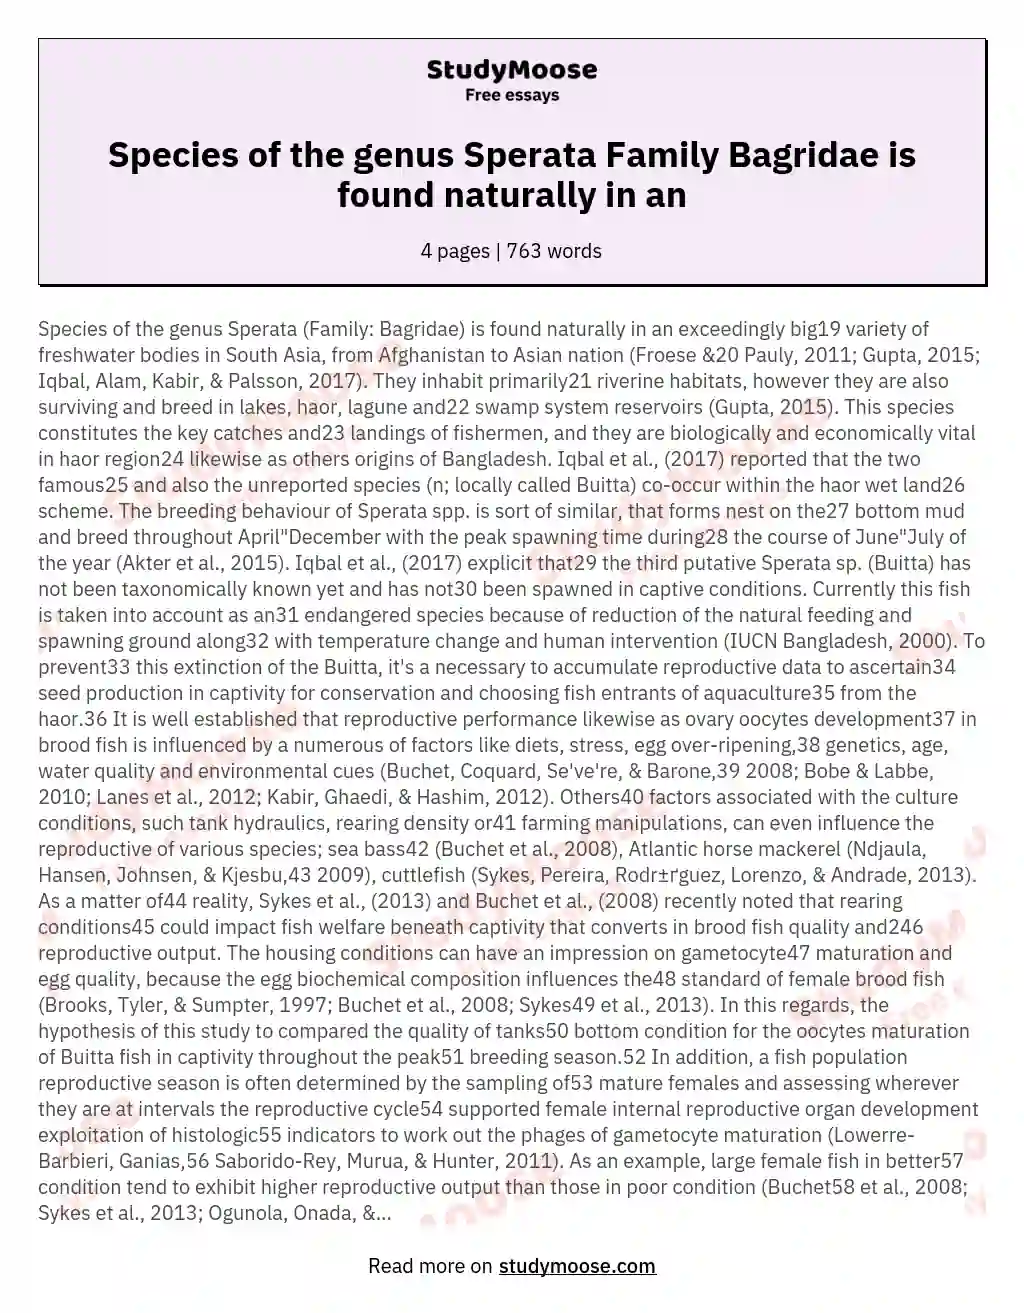 Species of the genus Sperata Family Bagridae is found naturally in an essay